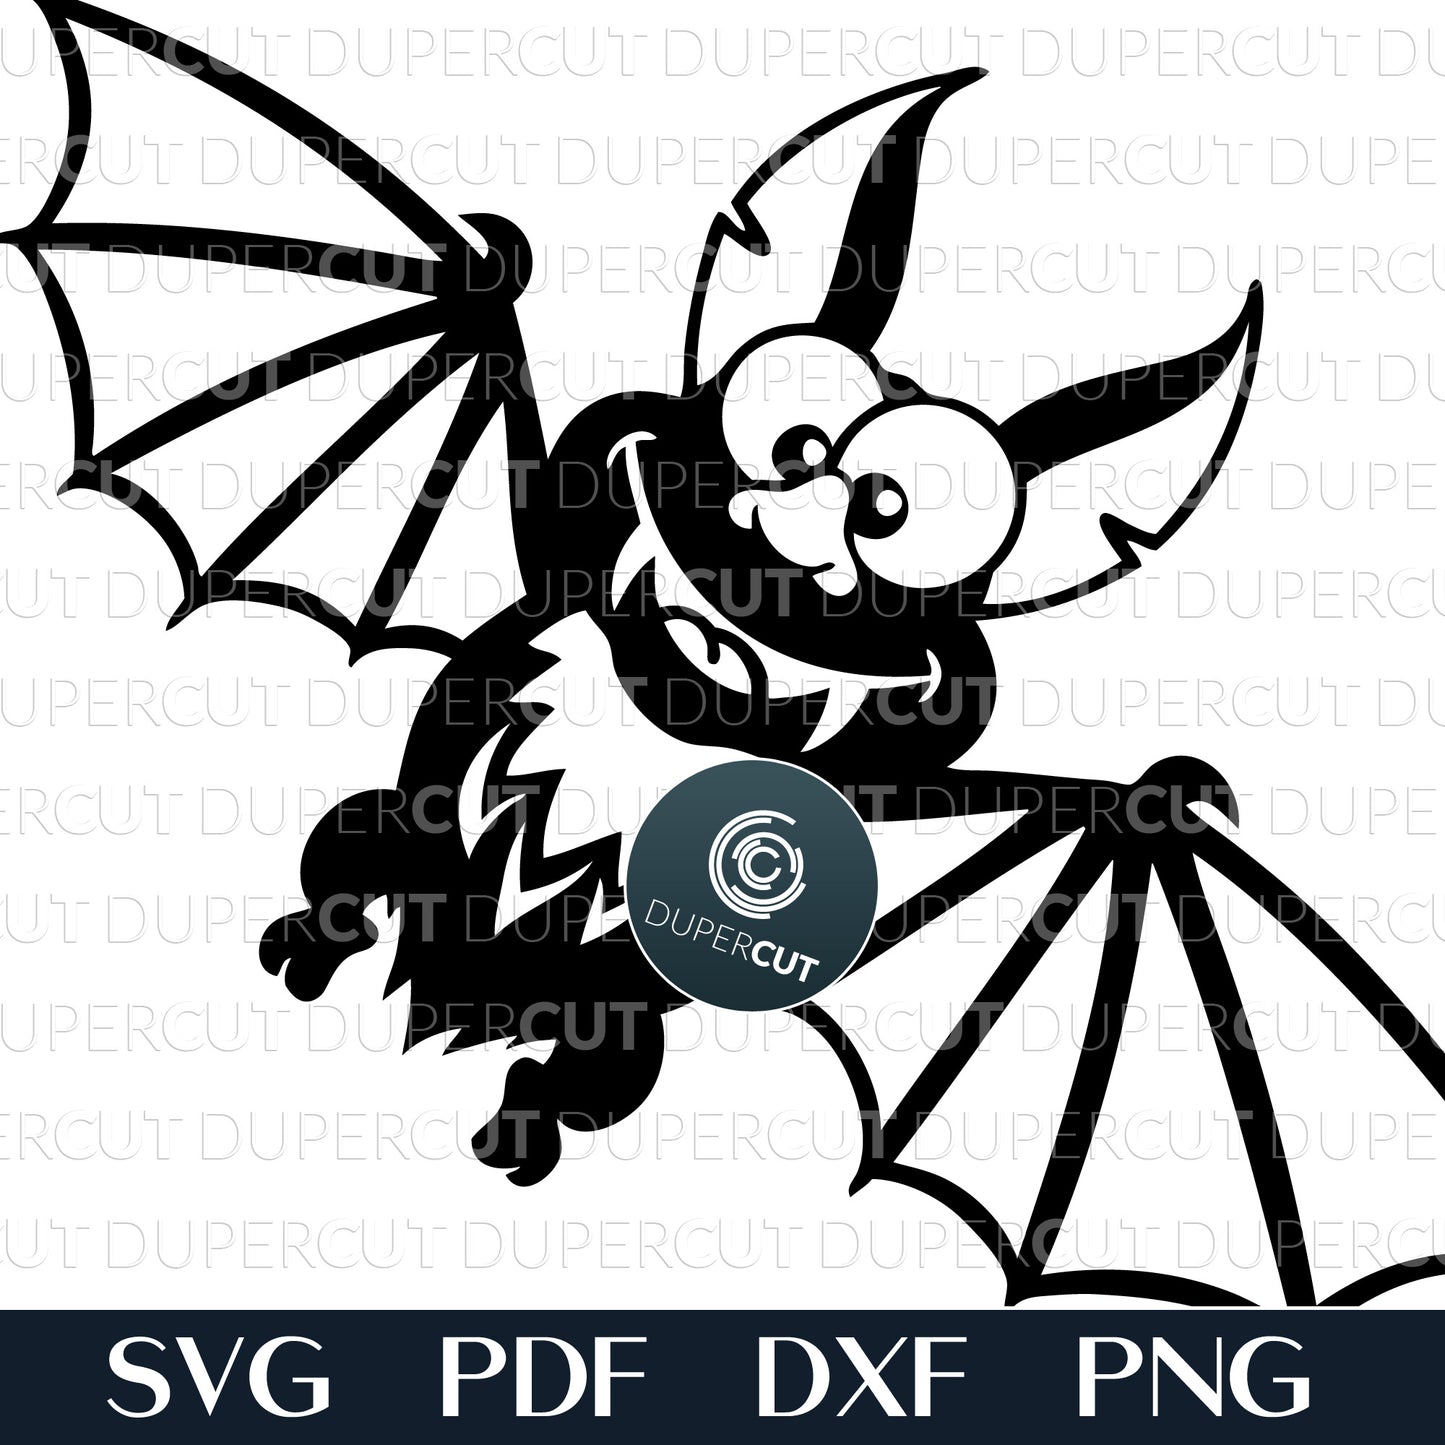 Happy smiling bat Halloween decoration - SVG PDF DXF layered cutting files for laser machines, Glowrorge, Cricut, Silhouette and CNC plasma